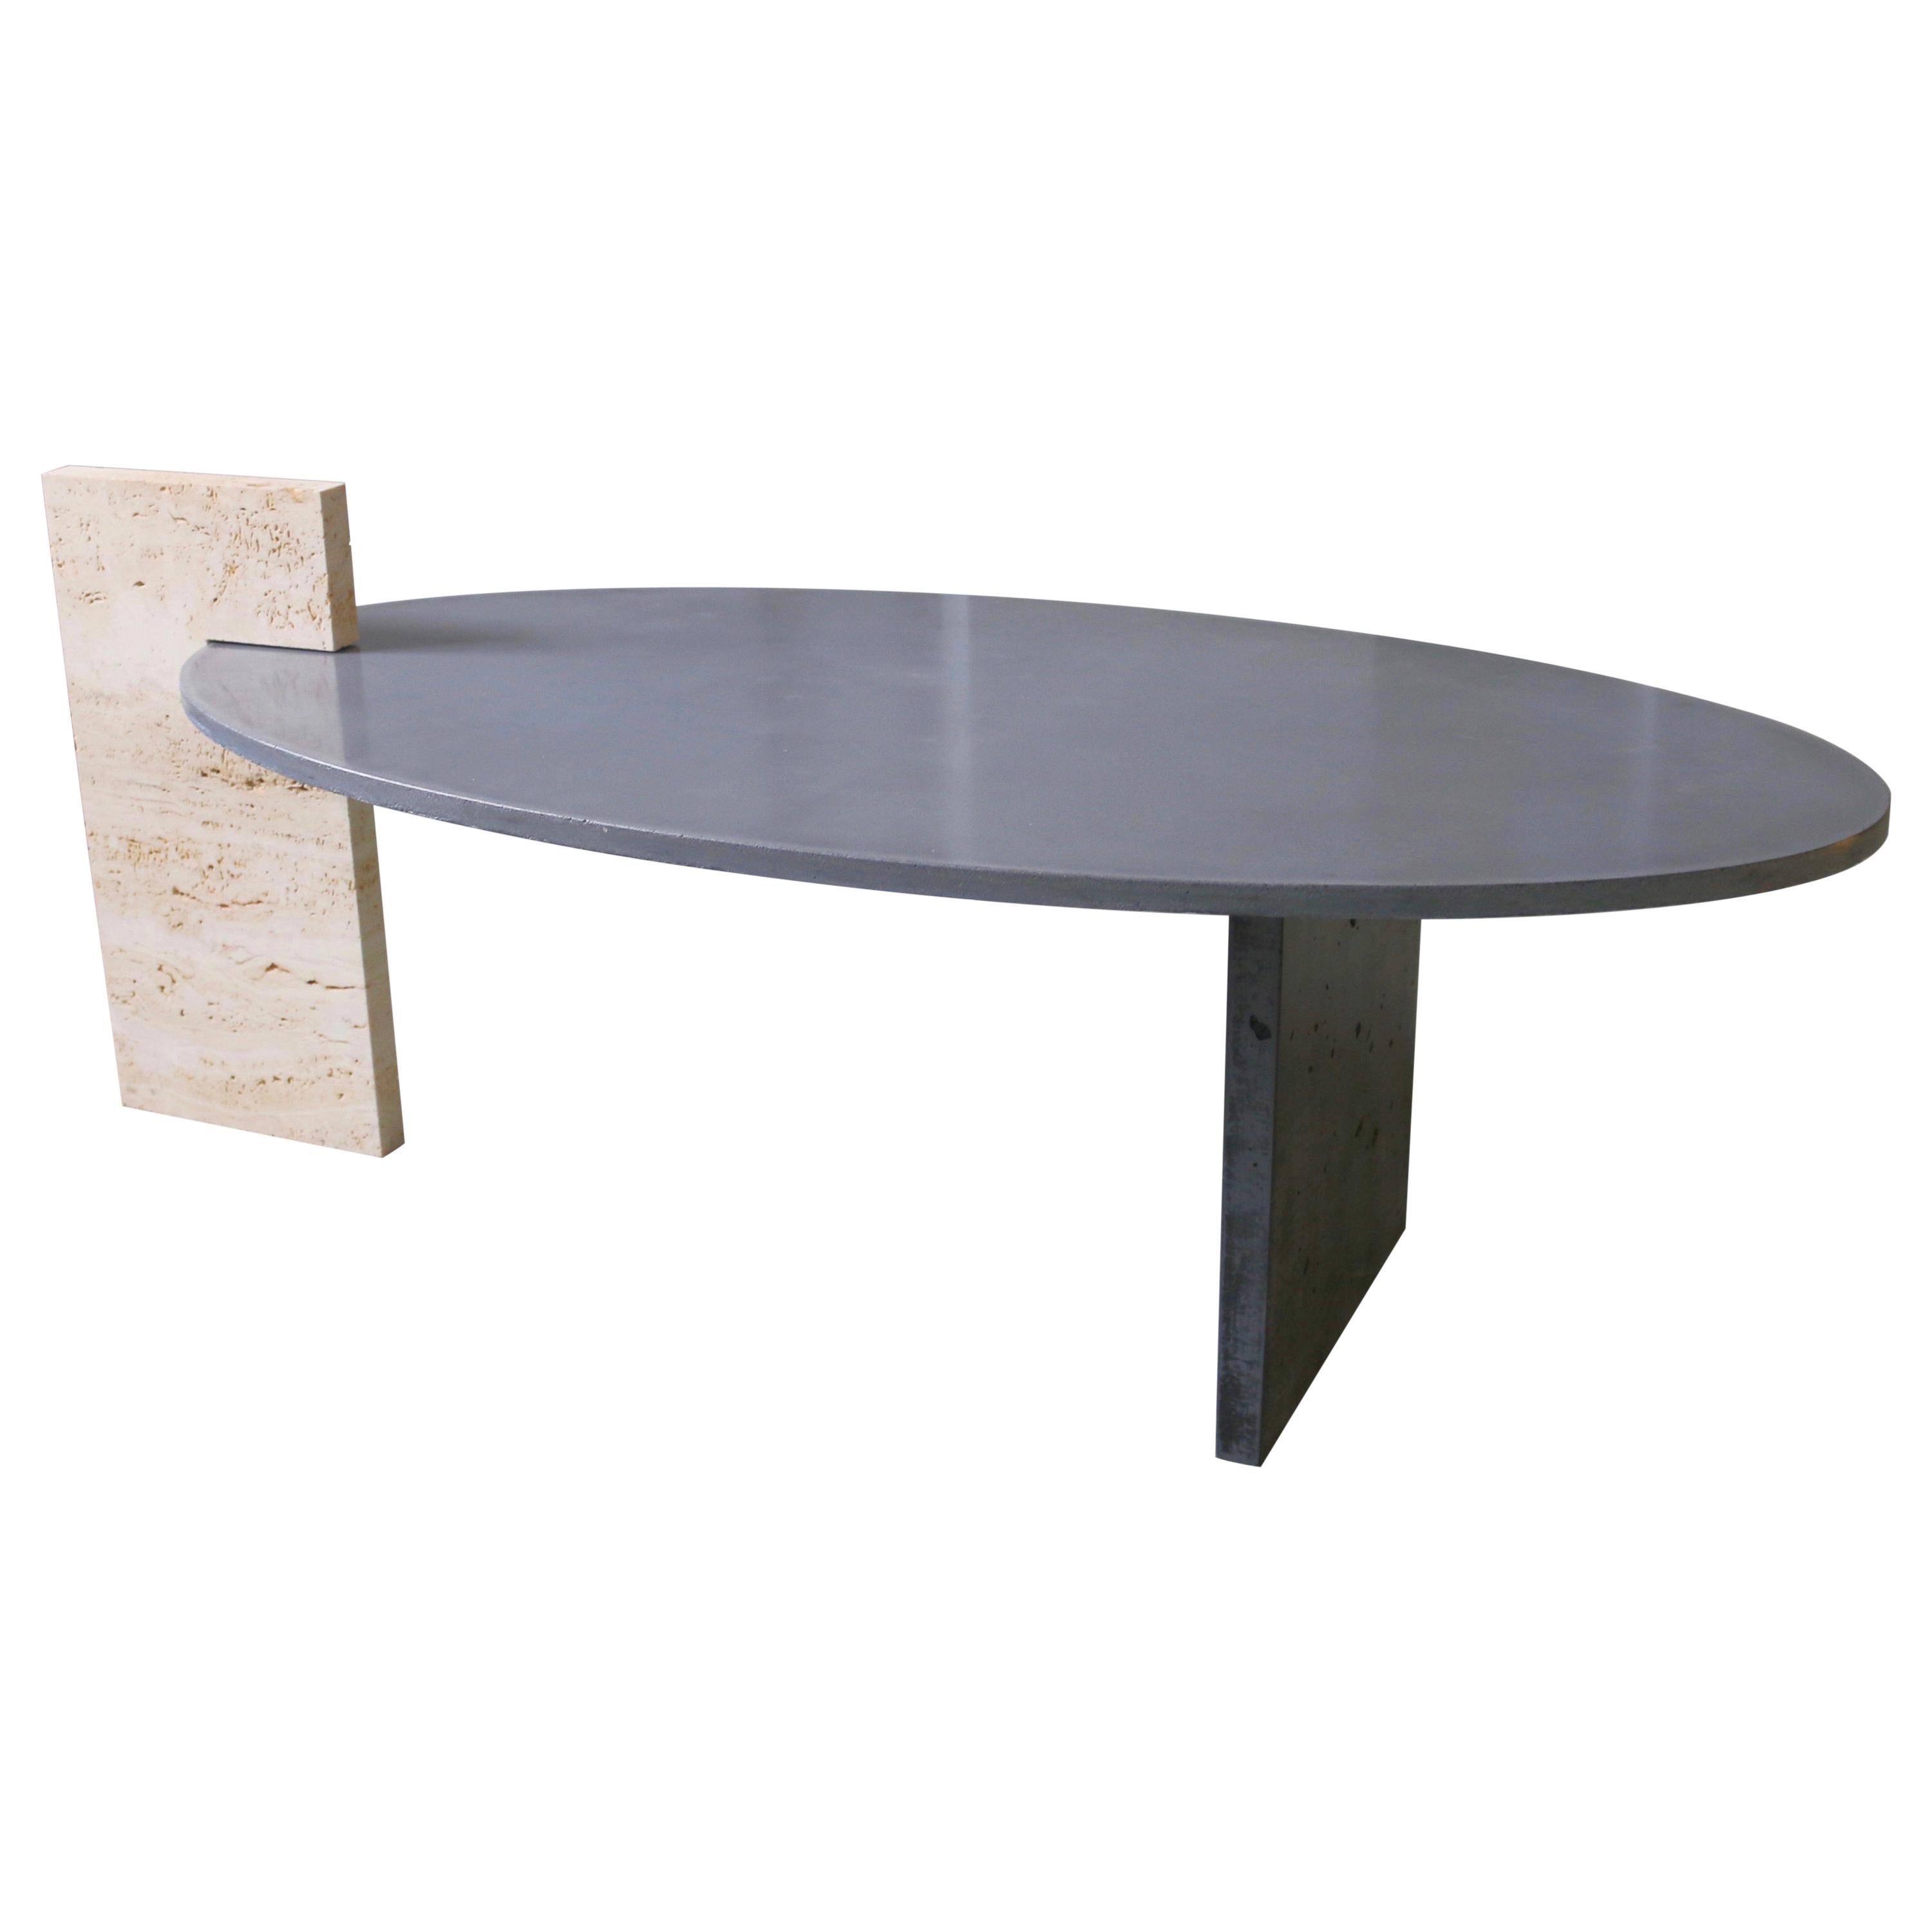 'Sphinx' Oval Coffee Table Concrete and Lime Stone  For Sale